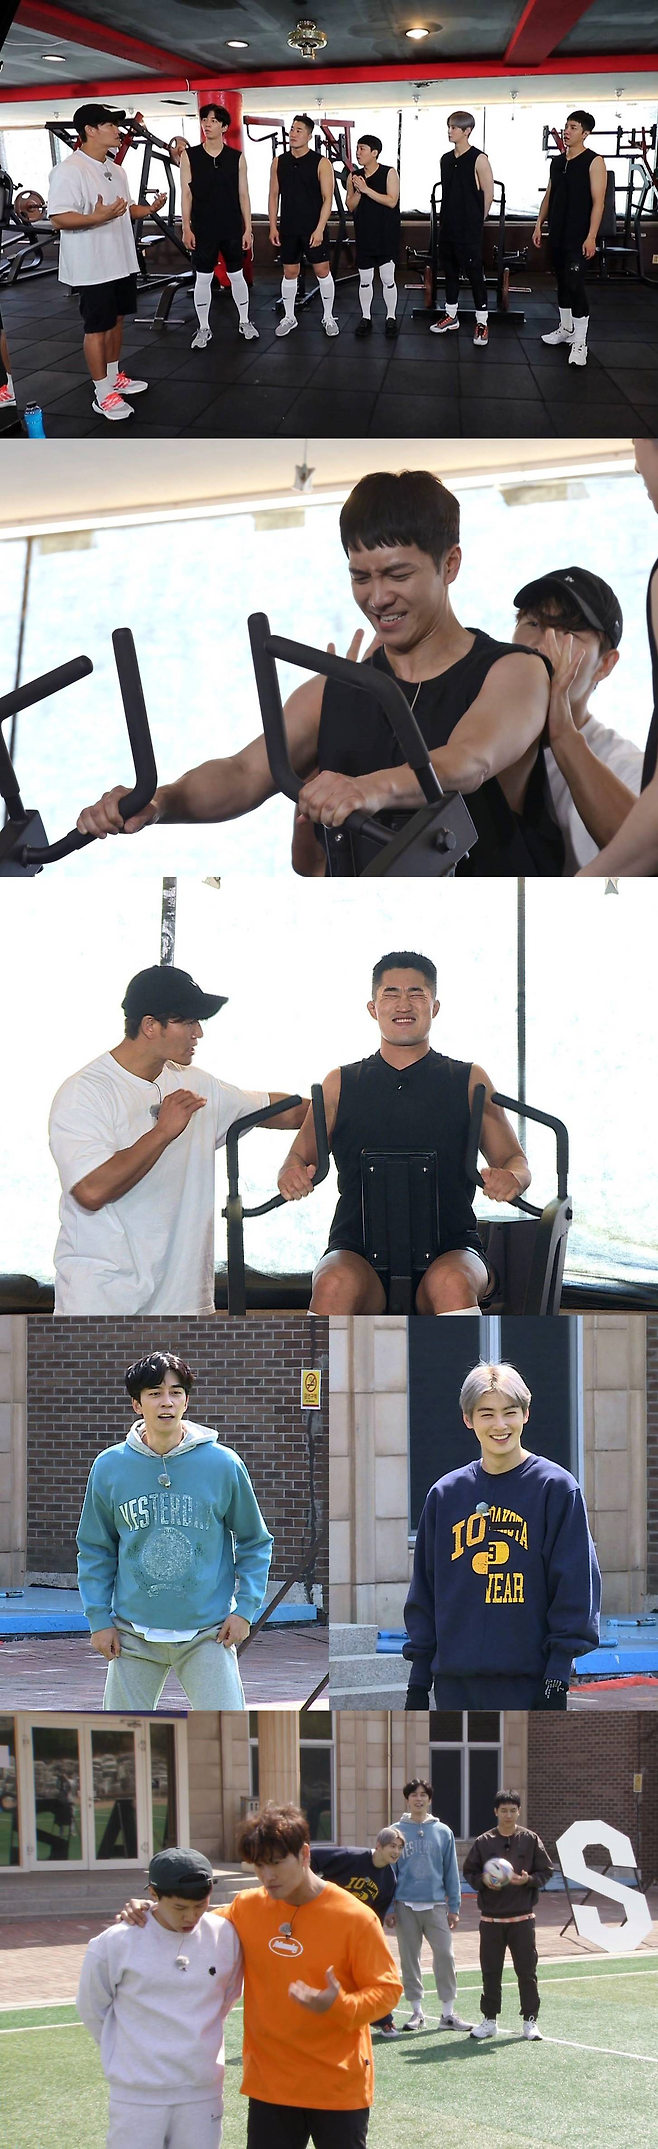 Kim Jong-kooks exit-free Spartan Health beginsOn SBS All The Butlers, which will be broadcast on the 25th, Hardcore Holly Exercise course without exit prepared by Master Kim Jong-kook will be held.Kim Jong-kook, who gave delicious Exercise tips to members from the last broadcast to bed, will guide members to a gym called the Myuschulin restaurant this time.The members were surprised to see Kim Jong-kooks back muscles, which were stimulated and angry, and that he was surprised that he felt full of eggs in his crab-backed carapace.In addition, the members challenged the circit training of hell proposed by Kim Jong-kook.Kim Jong-kook table Mara Taste Exercise Course without any break I wonder who will survive safely.On the other hand, Kim Jong-kook table vacation is followed by a foot volleyball battle with members and an unidentified UCLA foot volleyball team (?).The confident members were embarrassed by the unexpected performance of the opponent team.In the end, Kim Jong-kook, who was burned by the desire to win, was dragged out of the roar and laughed.In particular, Yang had a time with Kim Jong-kook and received intensive education.Who will be the winner in the All The Butlers Bae Hwanjang Foot Footwear Battle with the unidentified opponent team, and the Hells Health Vacation with the Huxabu will be unveiled at SBS All The Butlers, which will be broadcast at 6:25 pm on the 25th.